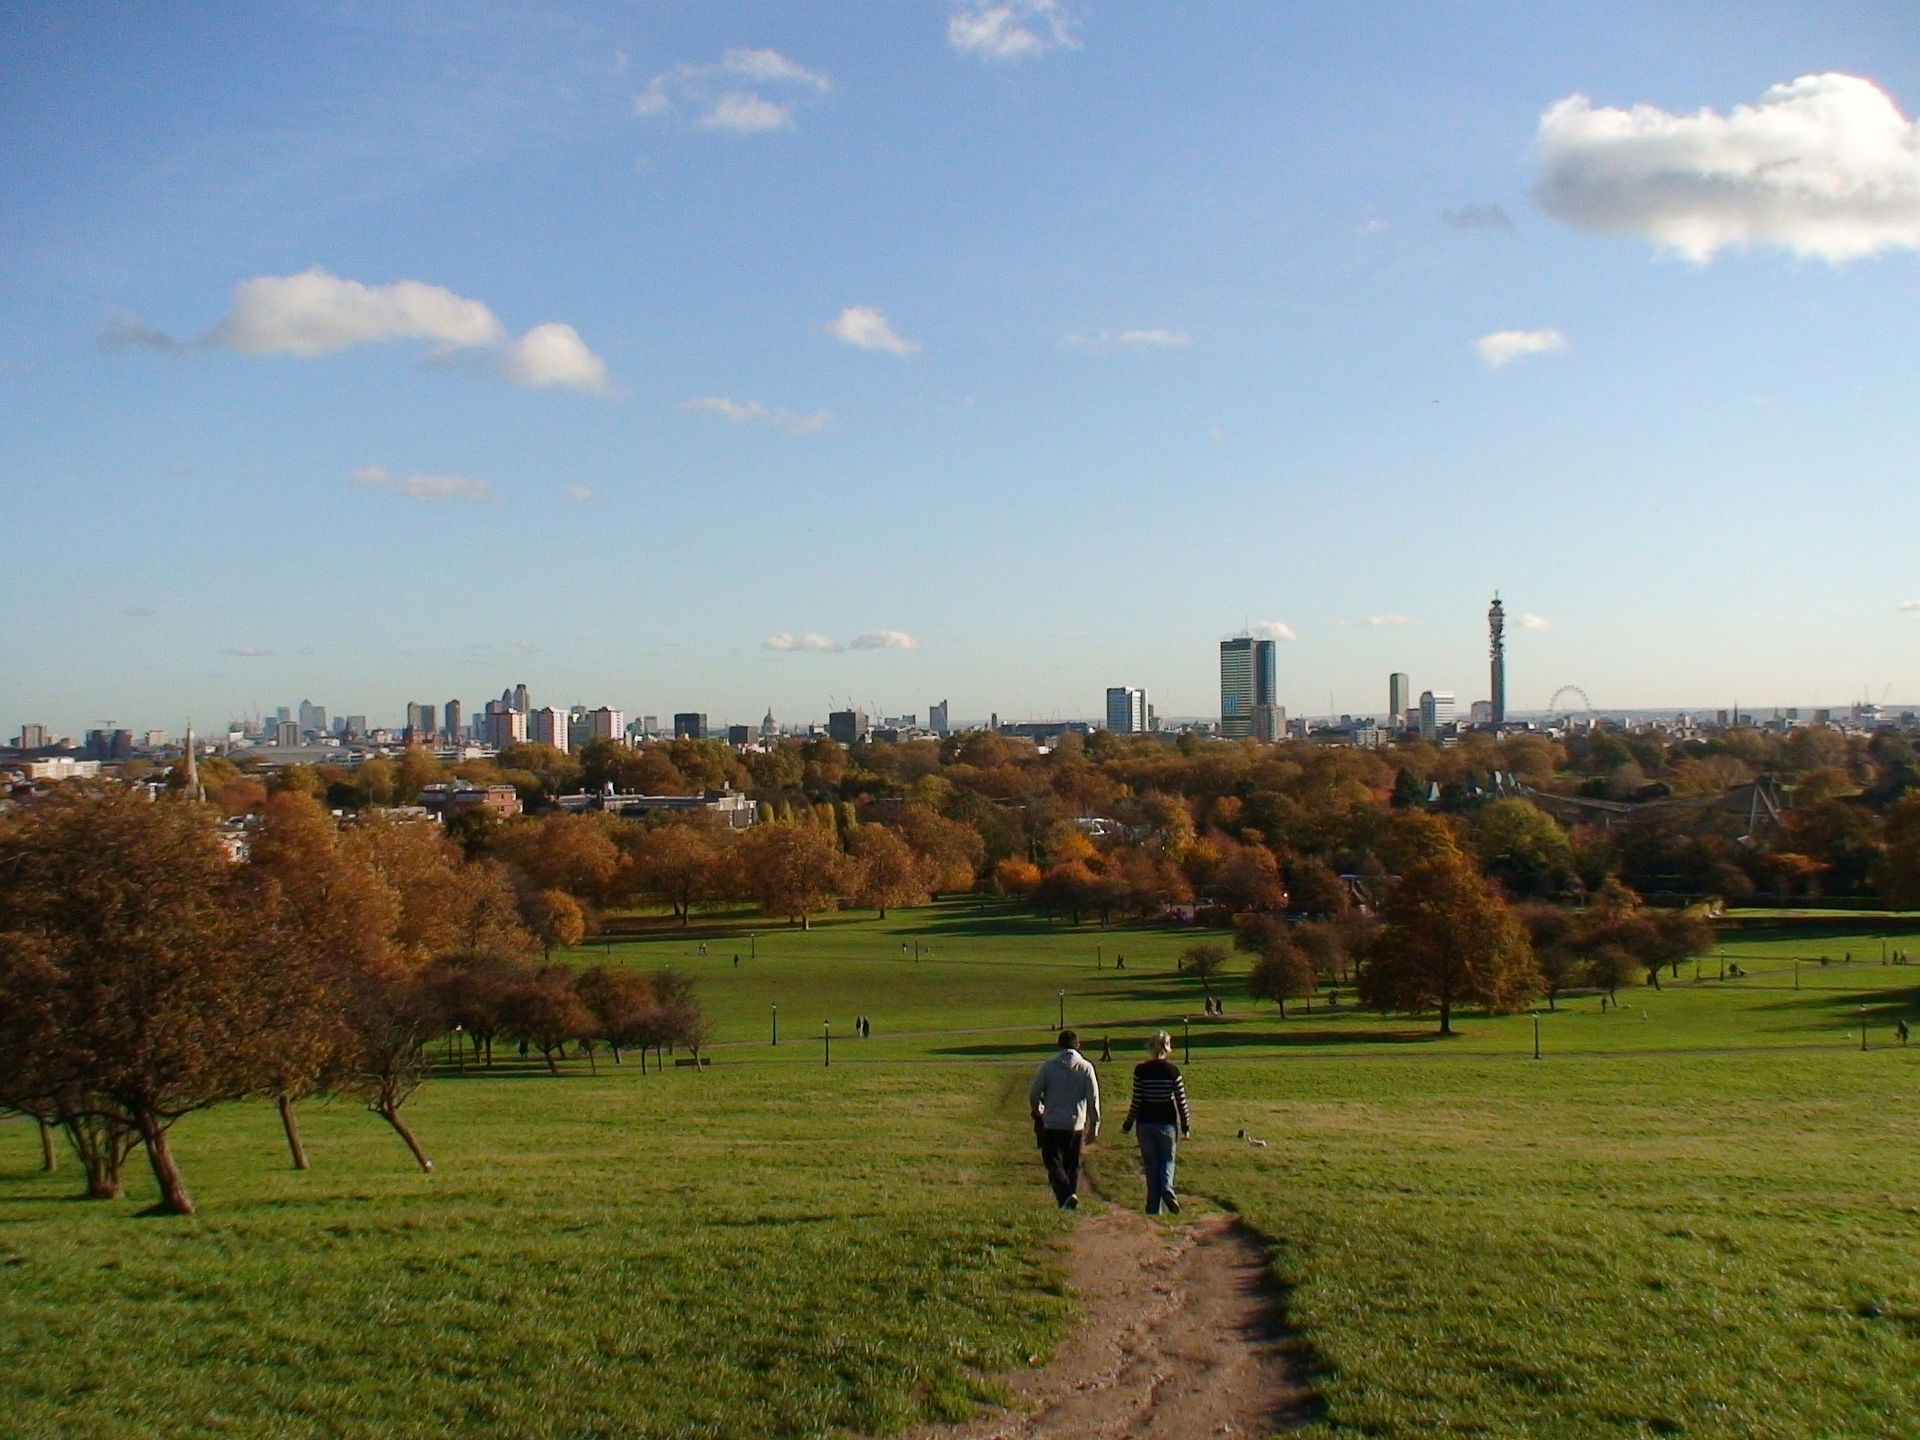 Regent Park/Primrose Hill - What to do in London